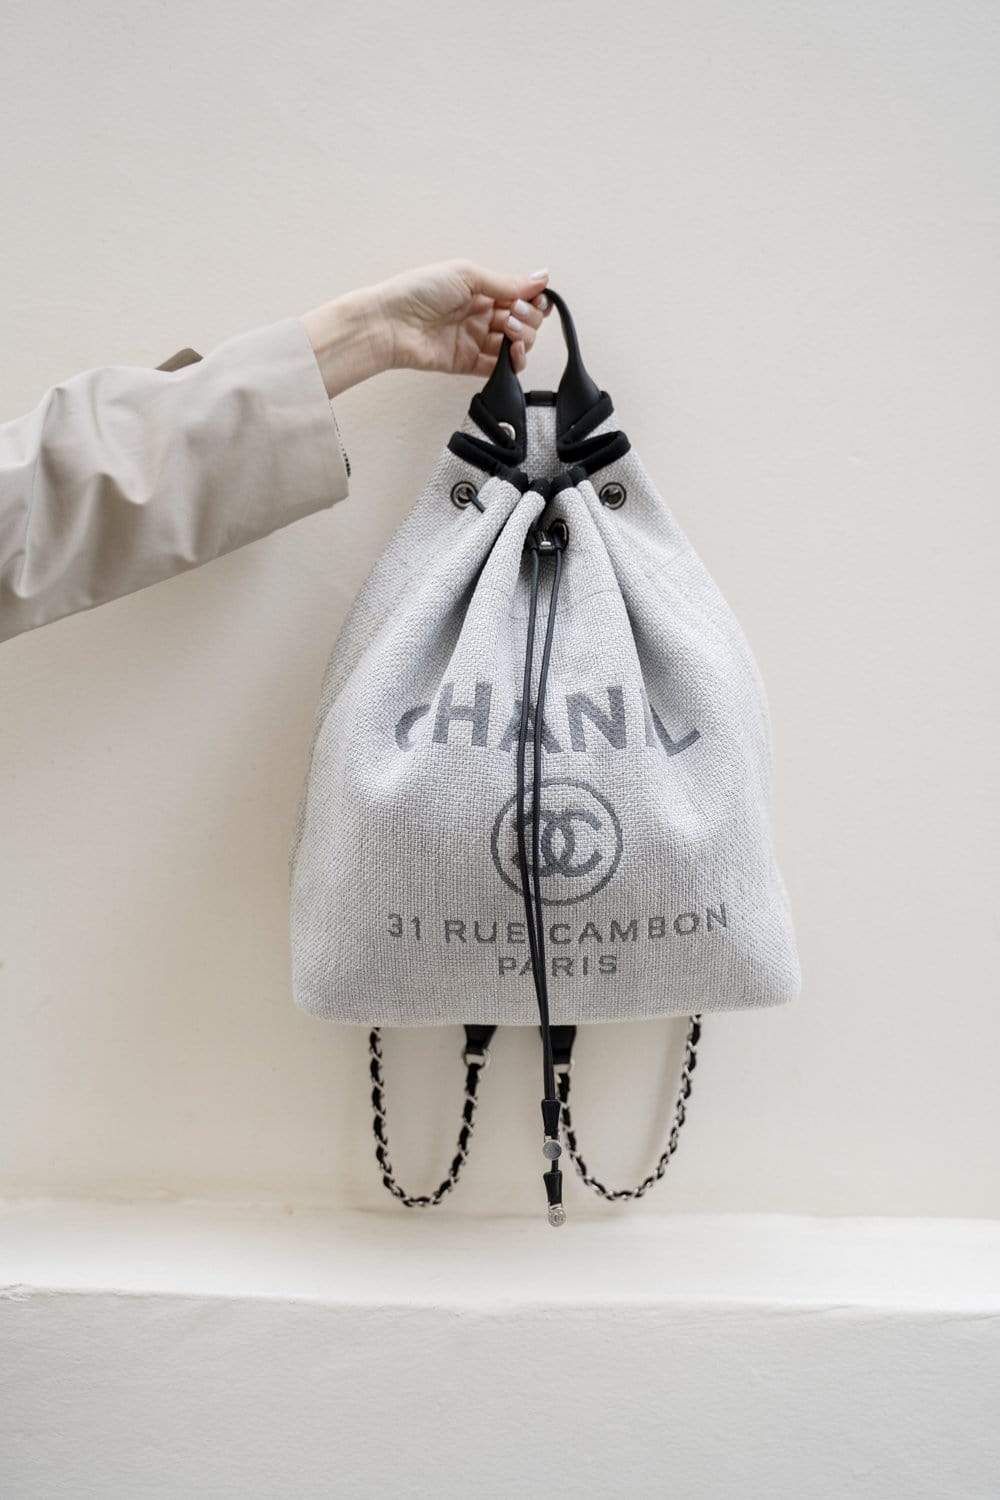 Chanel Deauville Grey and Black Backpack - ASL1825 – LuxuryPromise